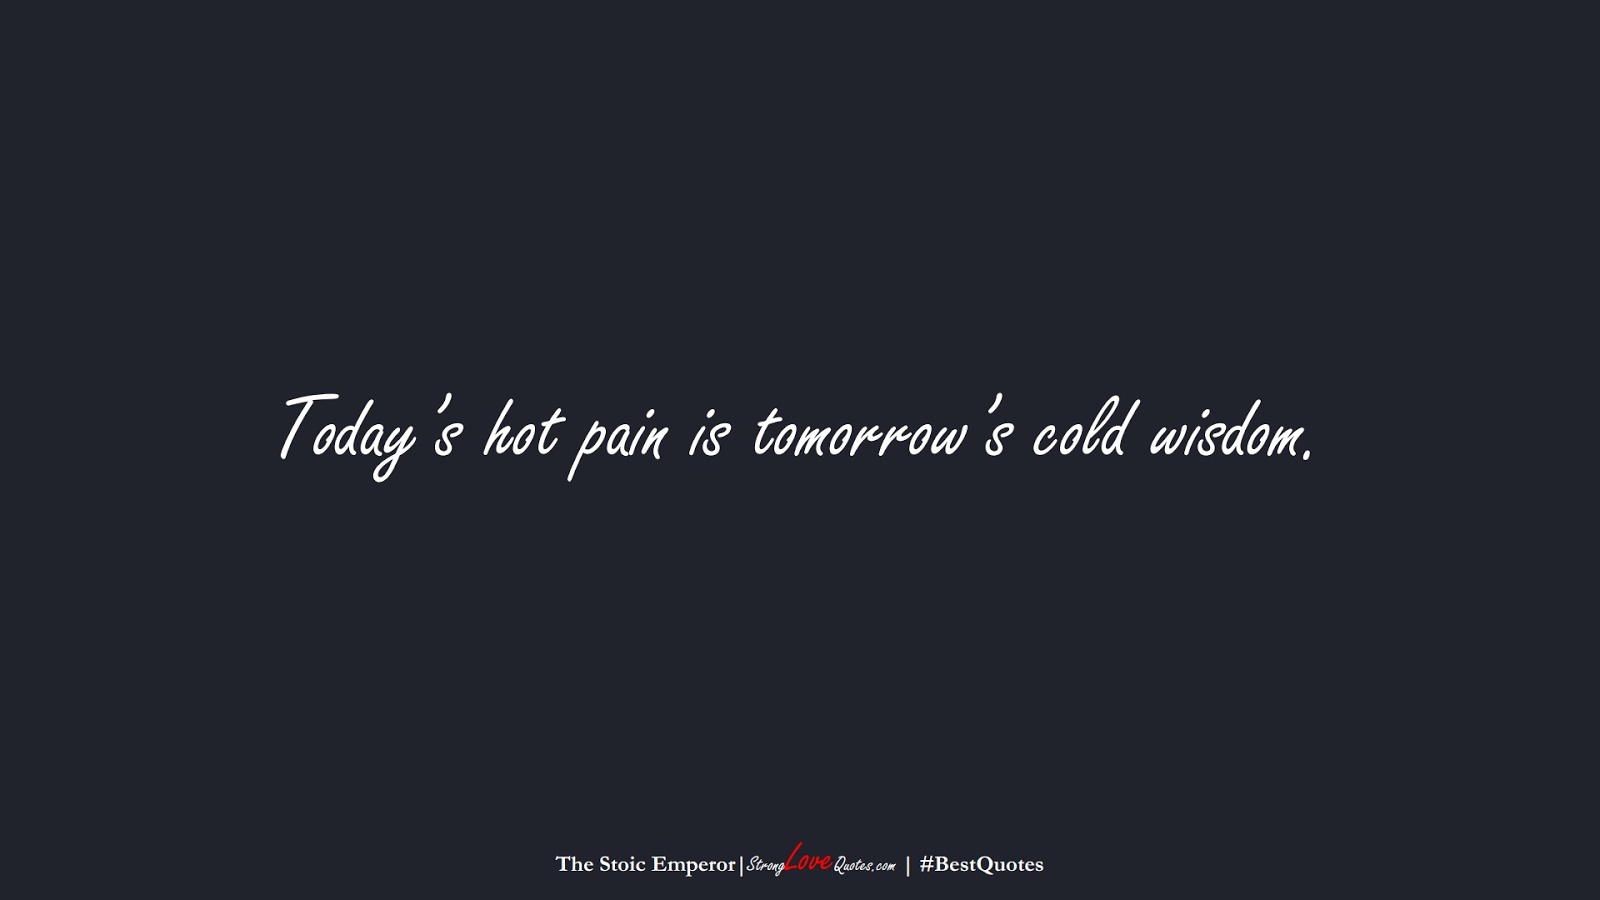 Today’s hot pain is tomorrow’s cold wisdom. (The Stoic Emperor);  #BestQuotes